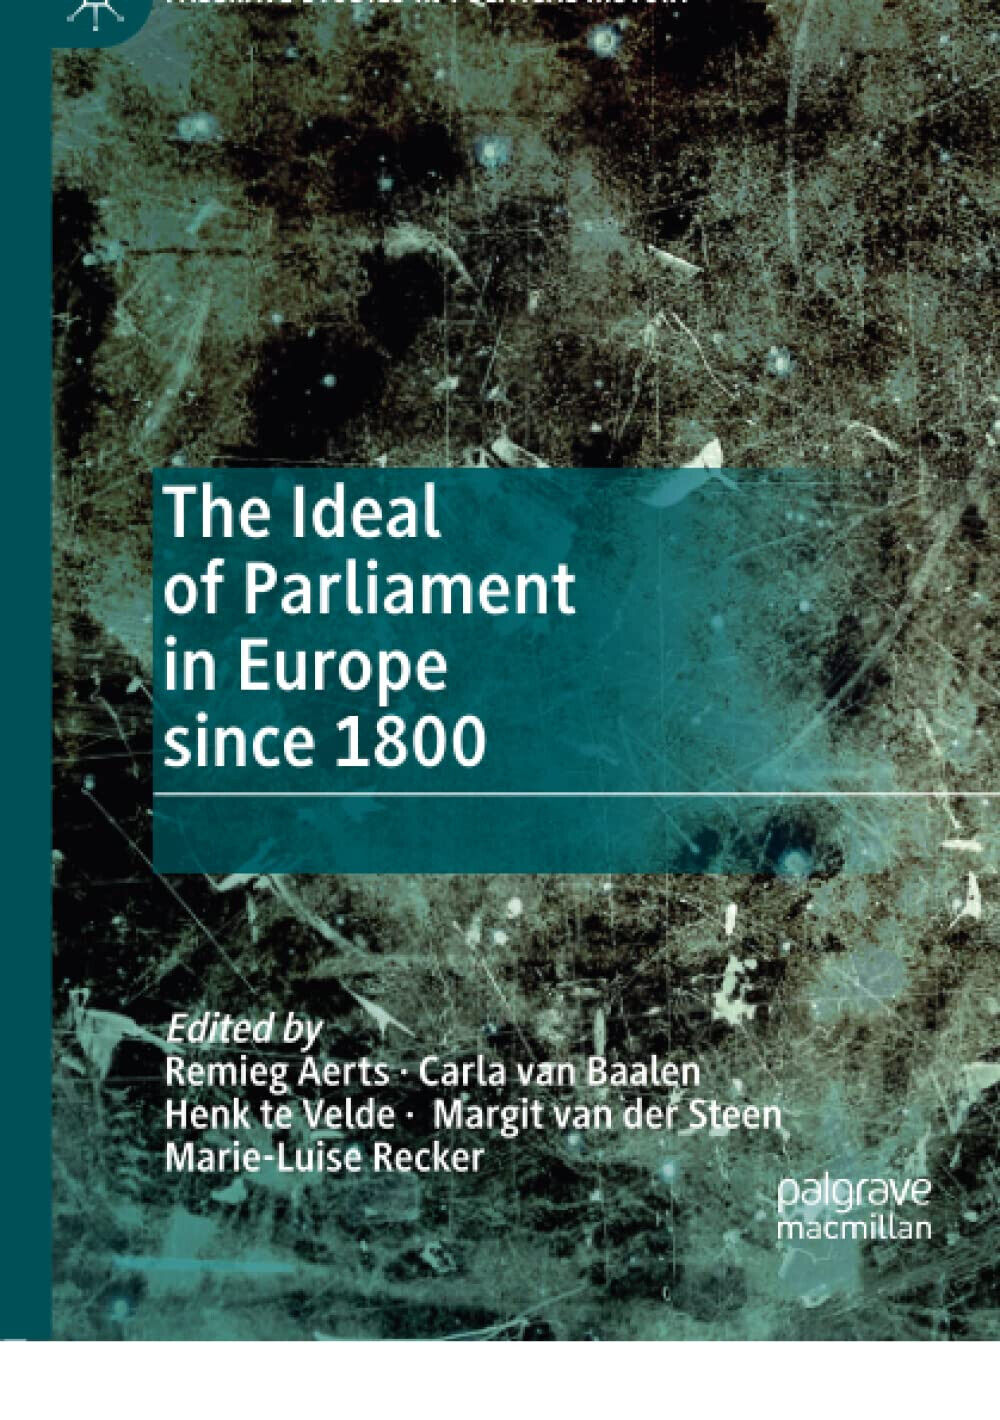 The Ideal of Parliament in Europe since 1800 - Remieg Aerts - Palgrave, 2020